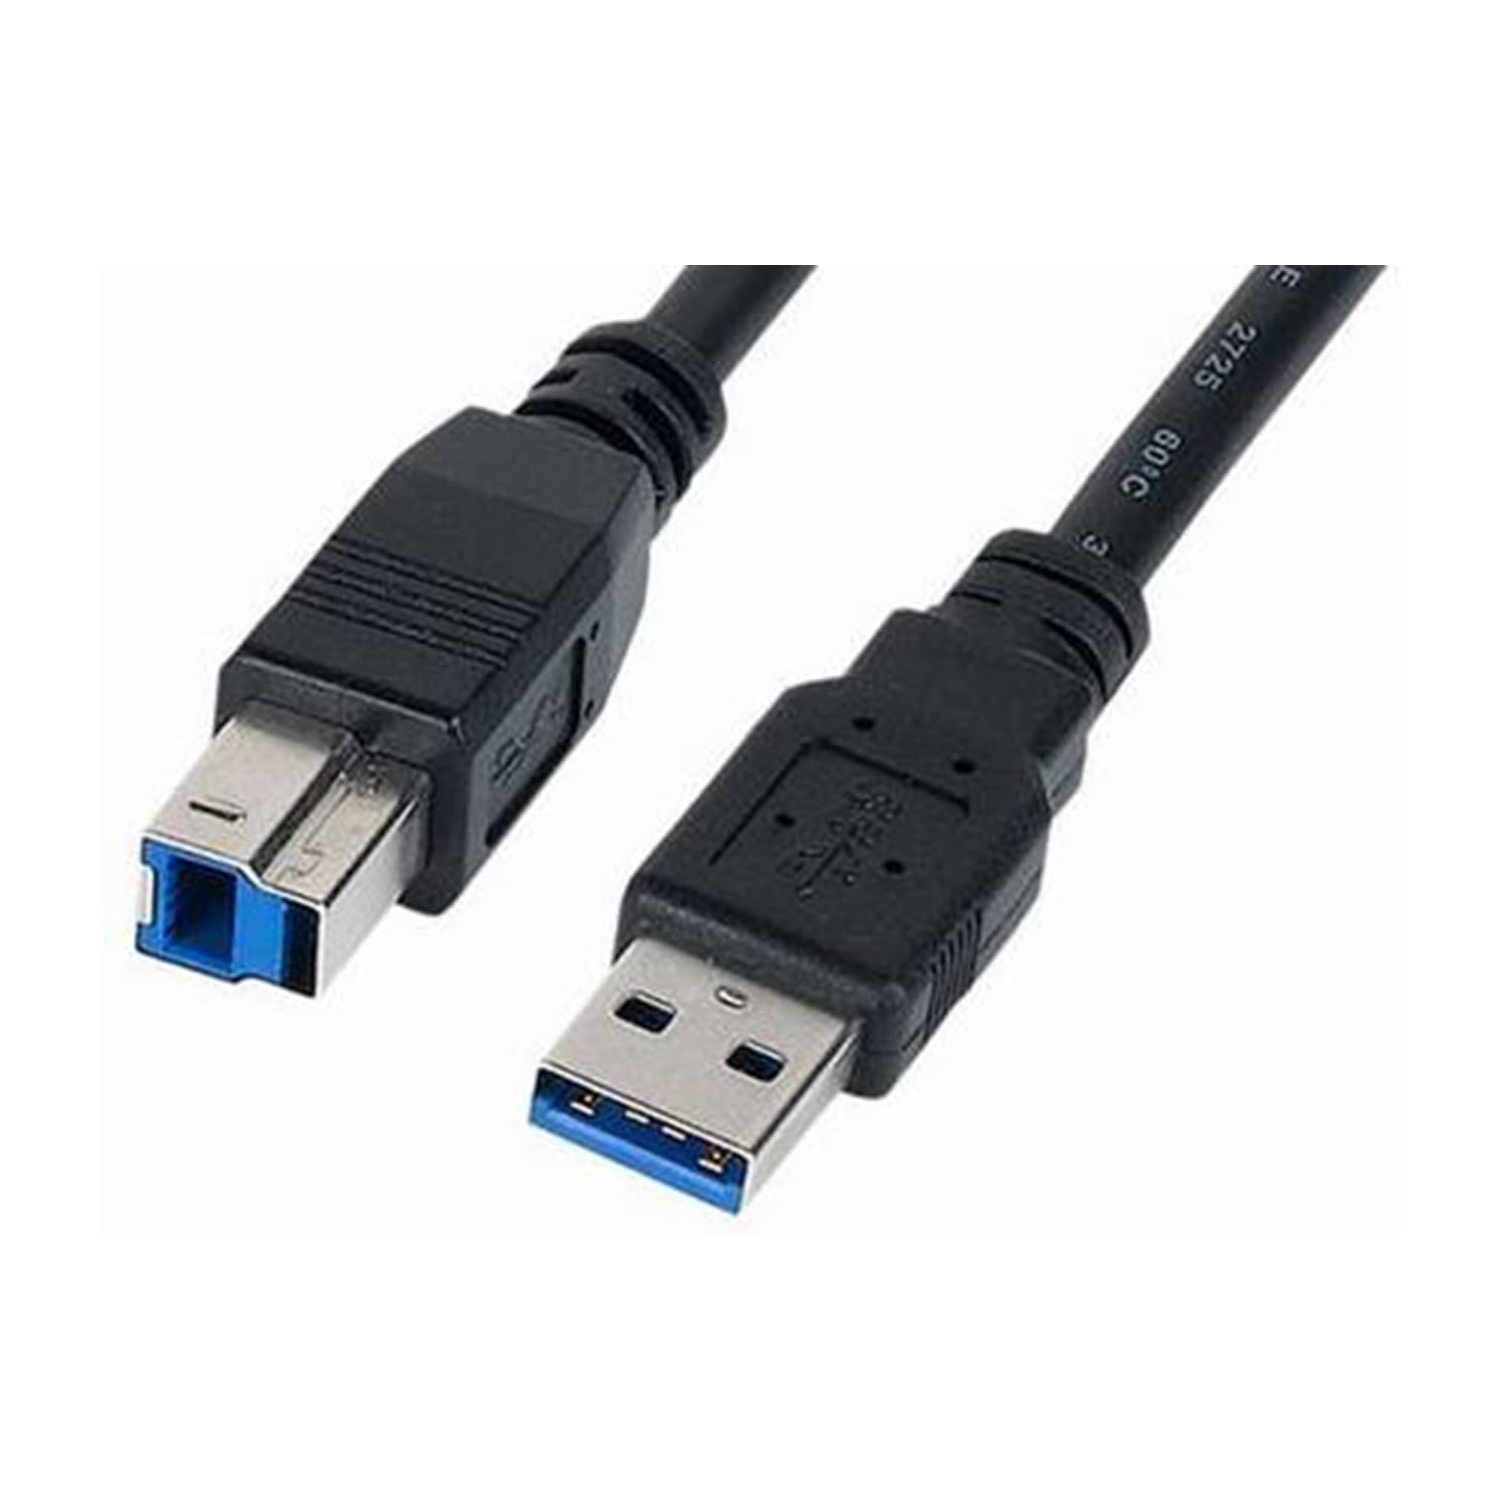 HYFAI Printer Printing Cable (3ft/1m) USB 3.0 Type A to B Male Computer Scanner Cord for Brother,HP,Canon and More…